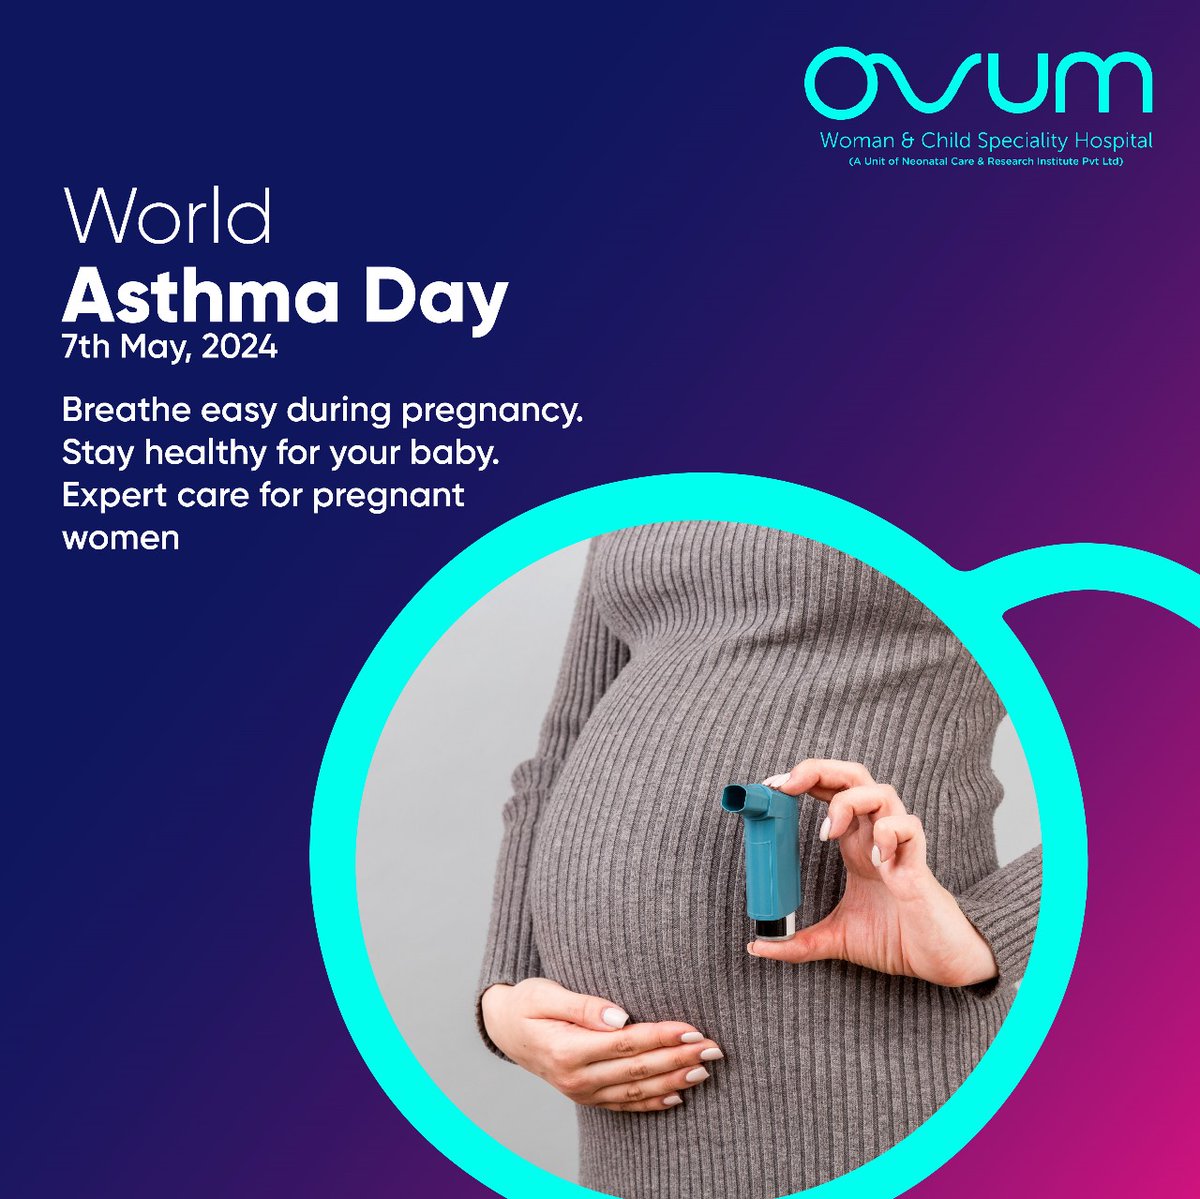 This #WorldAsthmaDay, breathe easy with your baby on the way! Proper breathing techniques can make a big difference during pregnancy. 
We offer guidance for pregnant women with asthma for yourself and your little one. #asthmaeducationempowers

#gina #ovumhospital #cometoovum